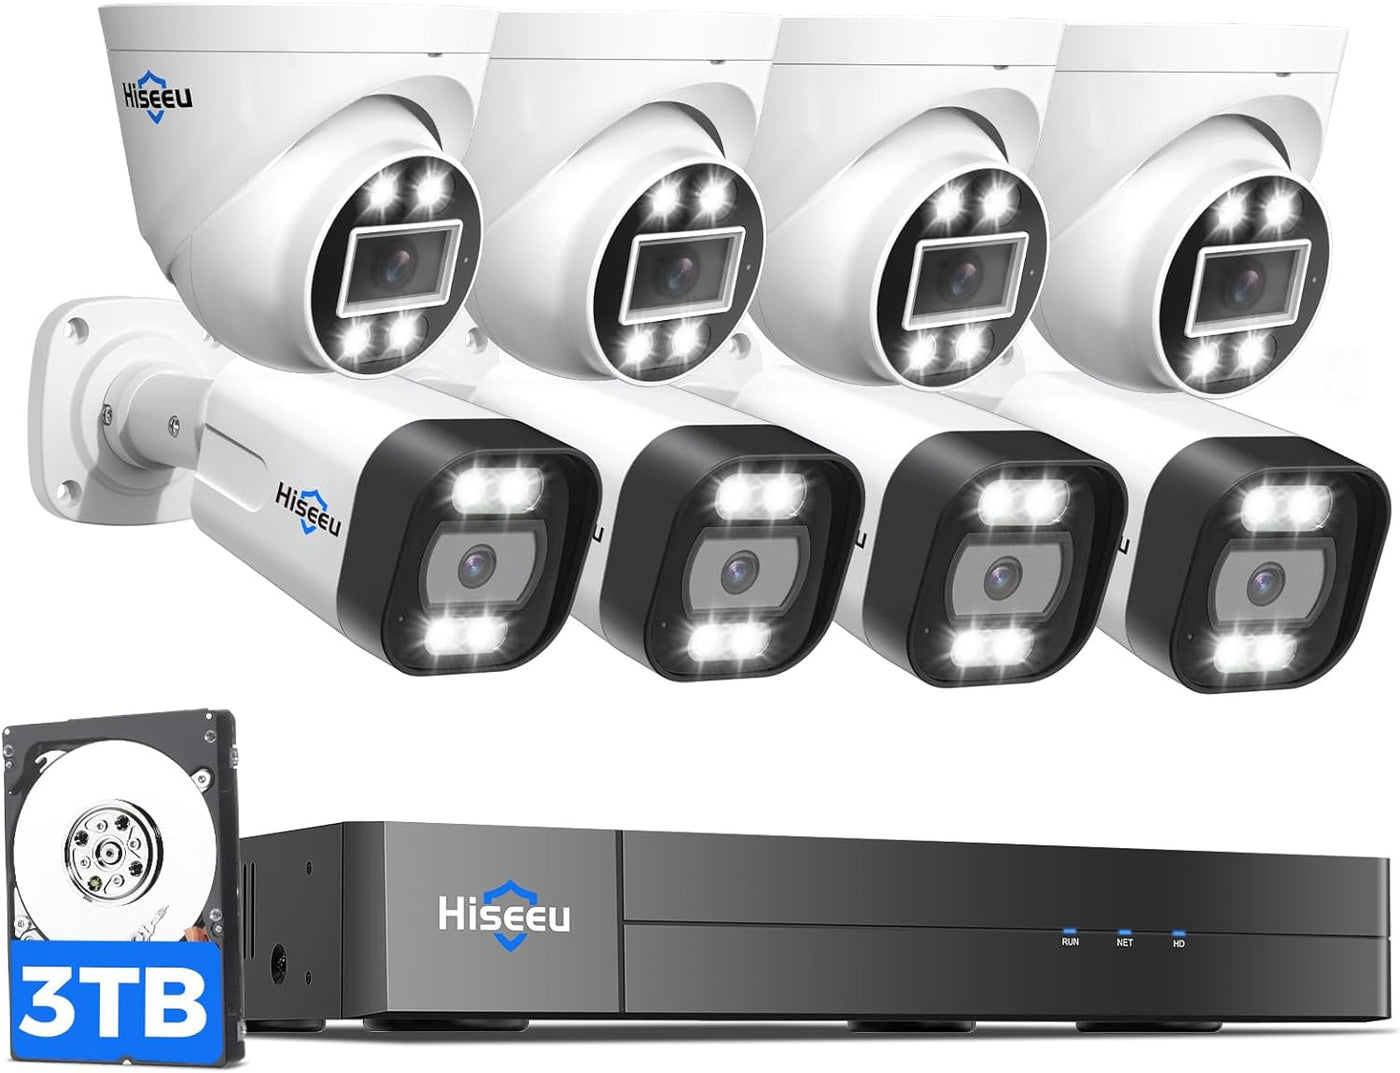 [2-Way Audio+121°Wide Angle] Hiseeu 4K 8MP PoE Security Camera System,8Pcs 5MP IP Wired Security Cameras Indoor Outdoor,PoE NVR 16CH Expandable,Human/Vehicle Detect,Playback,3TB HDD,24/7 Record